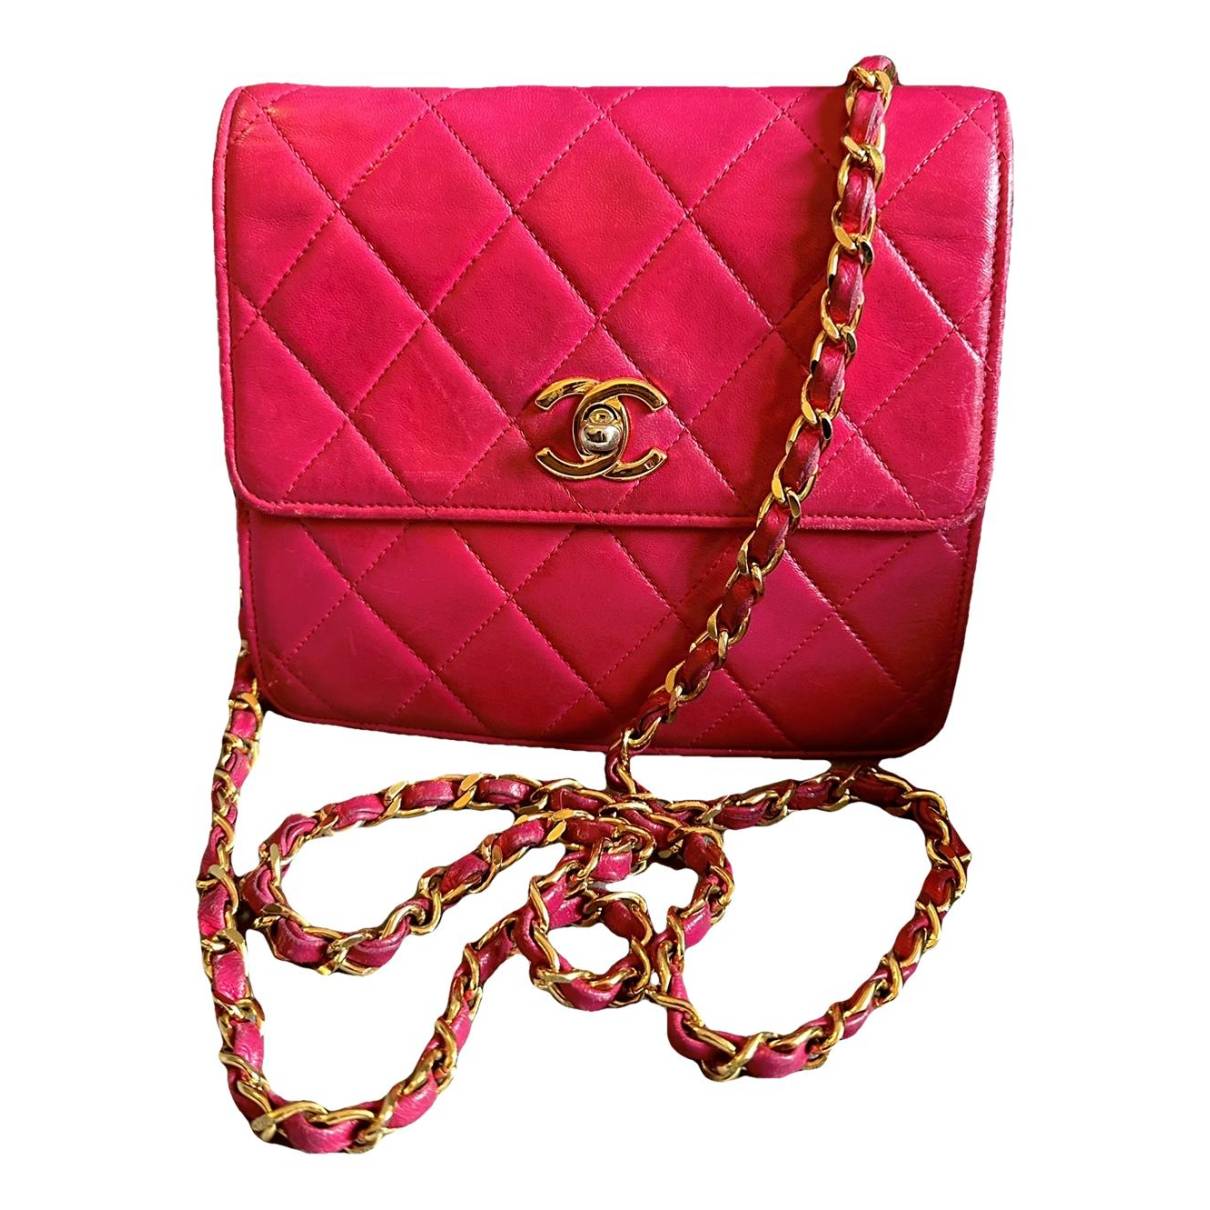 Timeless/classique leather crossbody bag Chanel Pink in Leather